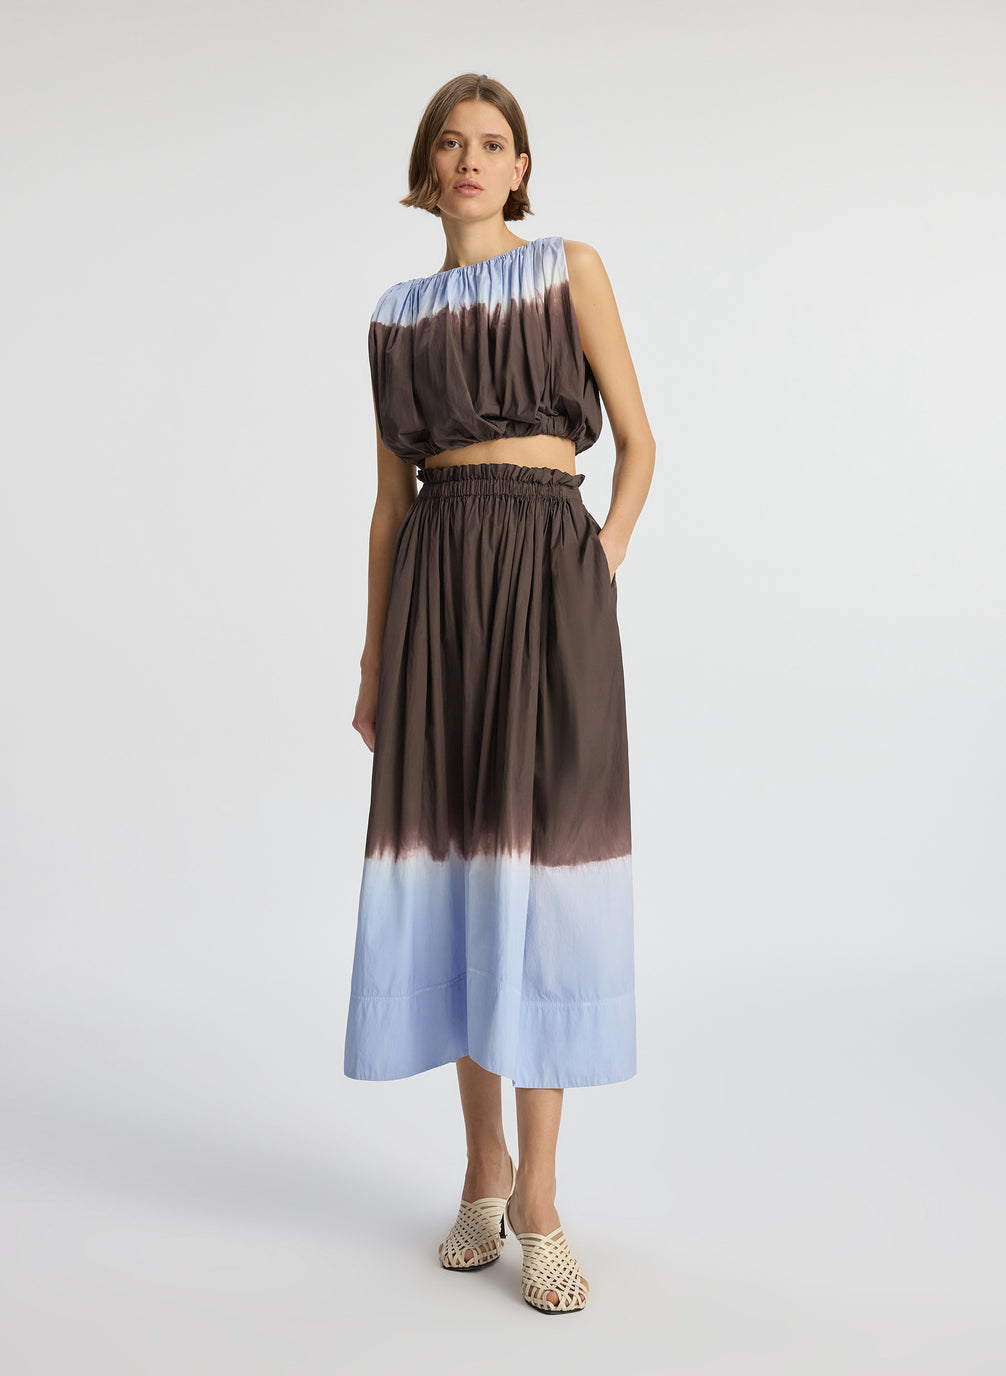 front view of woman wearing light blue and brown dip dyed sleeveless top and matching midi skirt